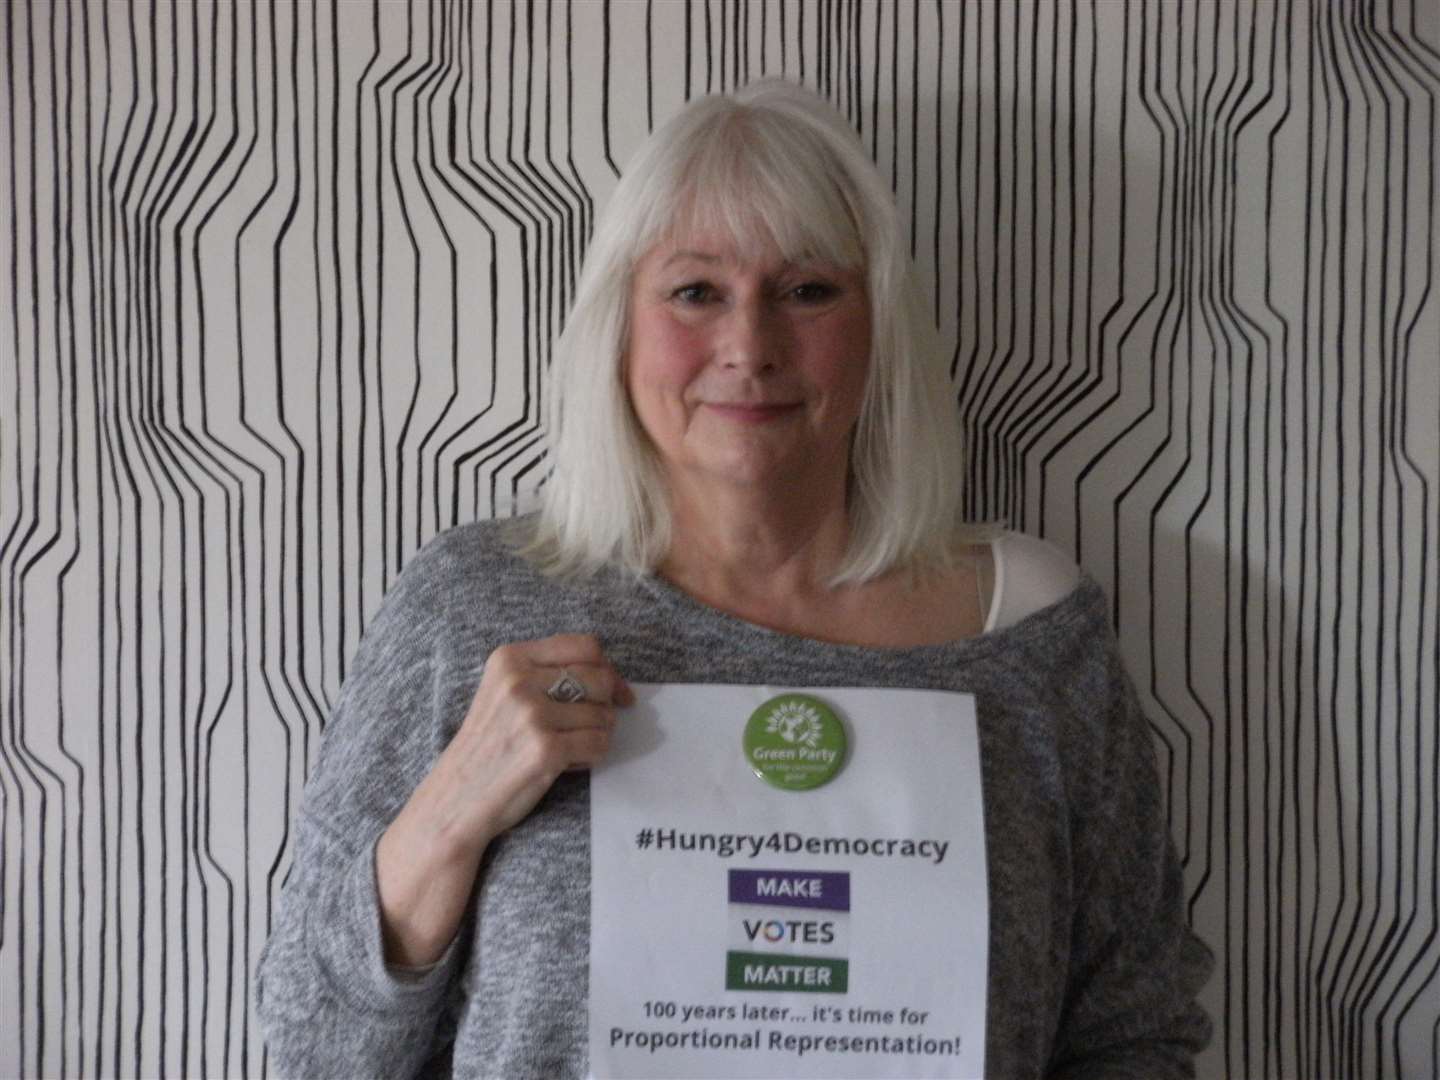 Marilyn Stone will be among hunger strikers backing the Make Votes Matter campaign for Proportional Representation